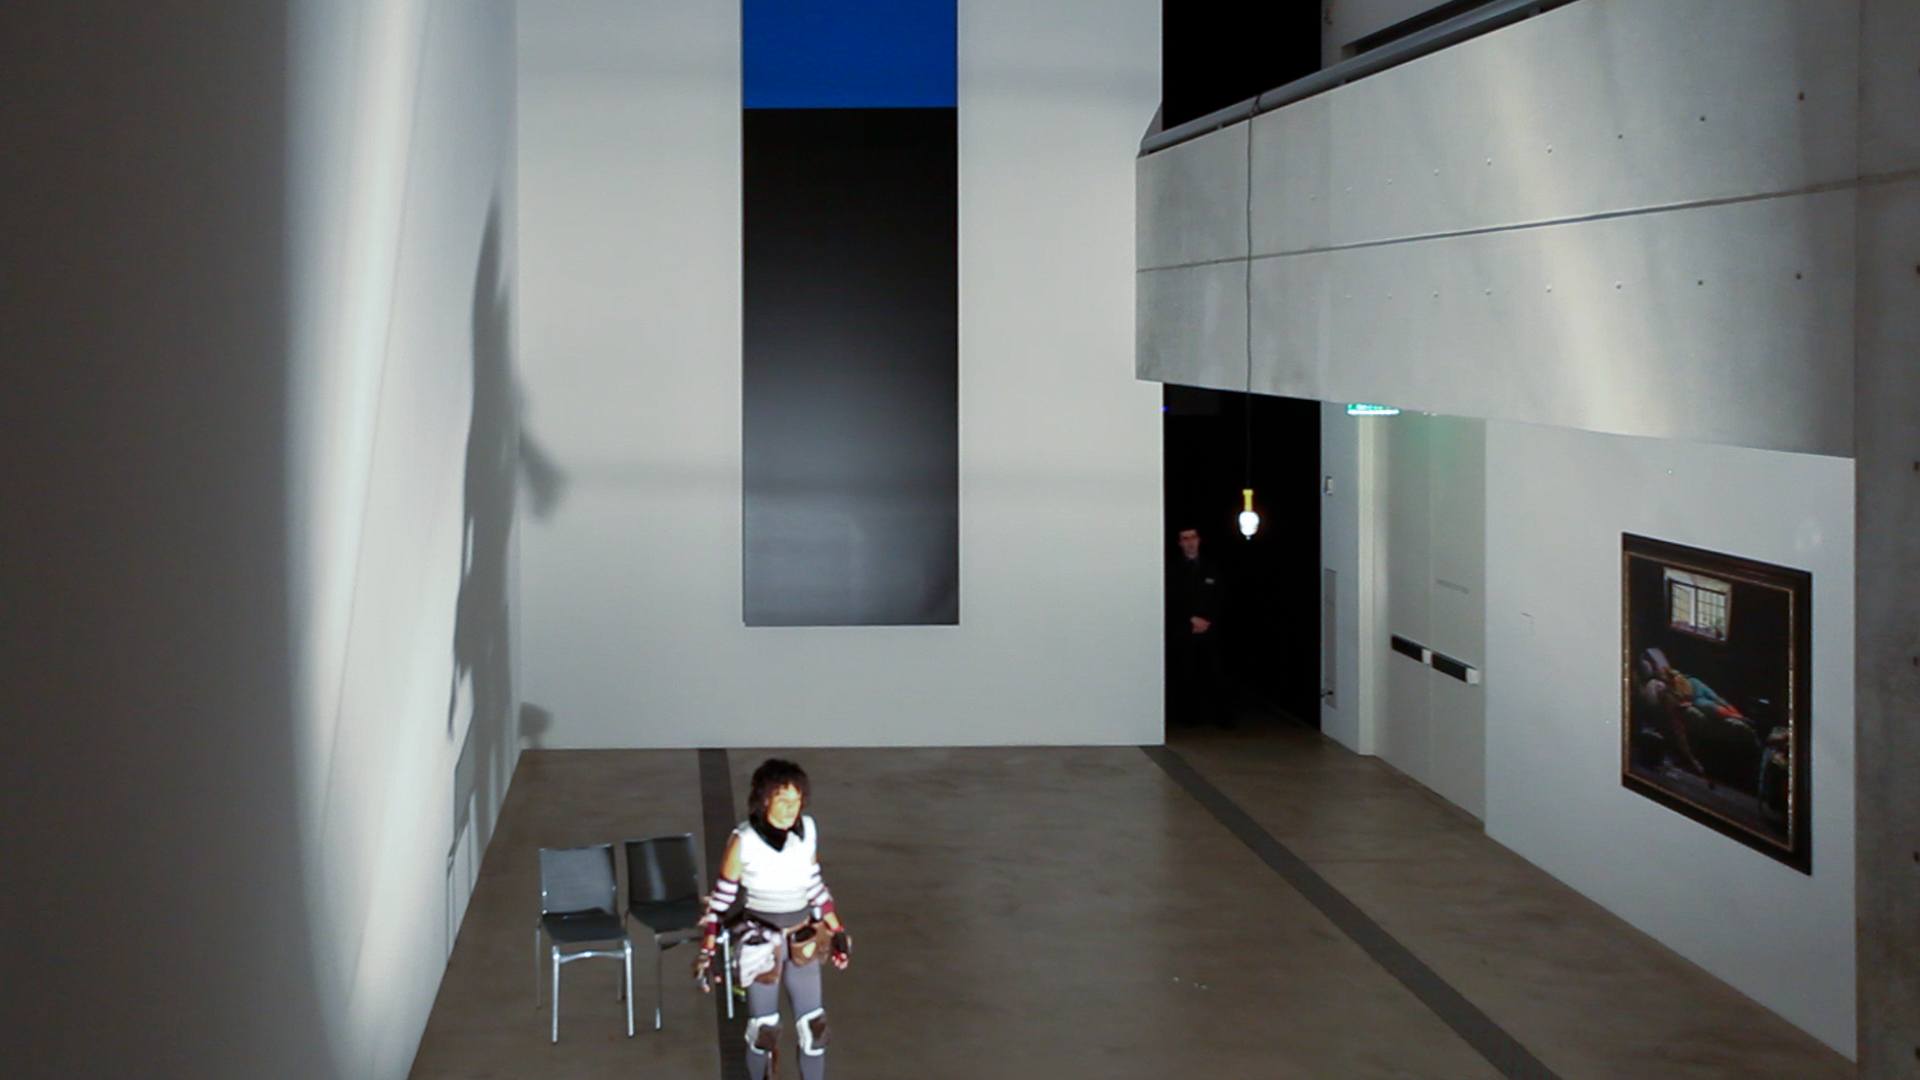 Wura-Natasha stands in the Lower-Main Gallery facing a bright light that casts her shadow on the wall.